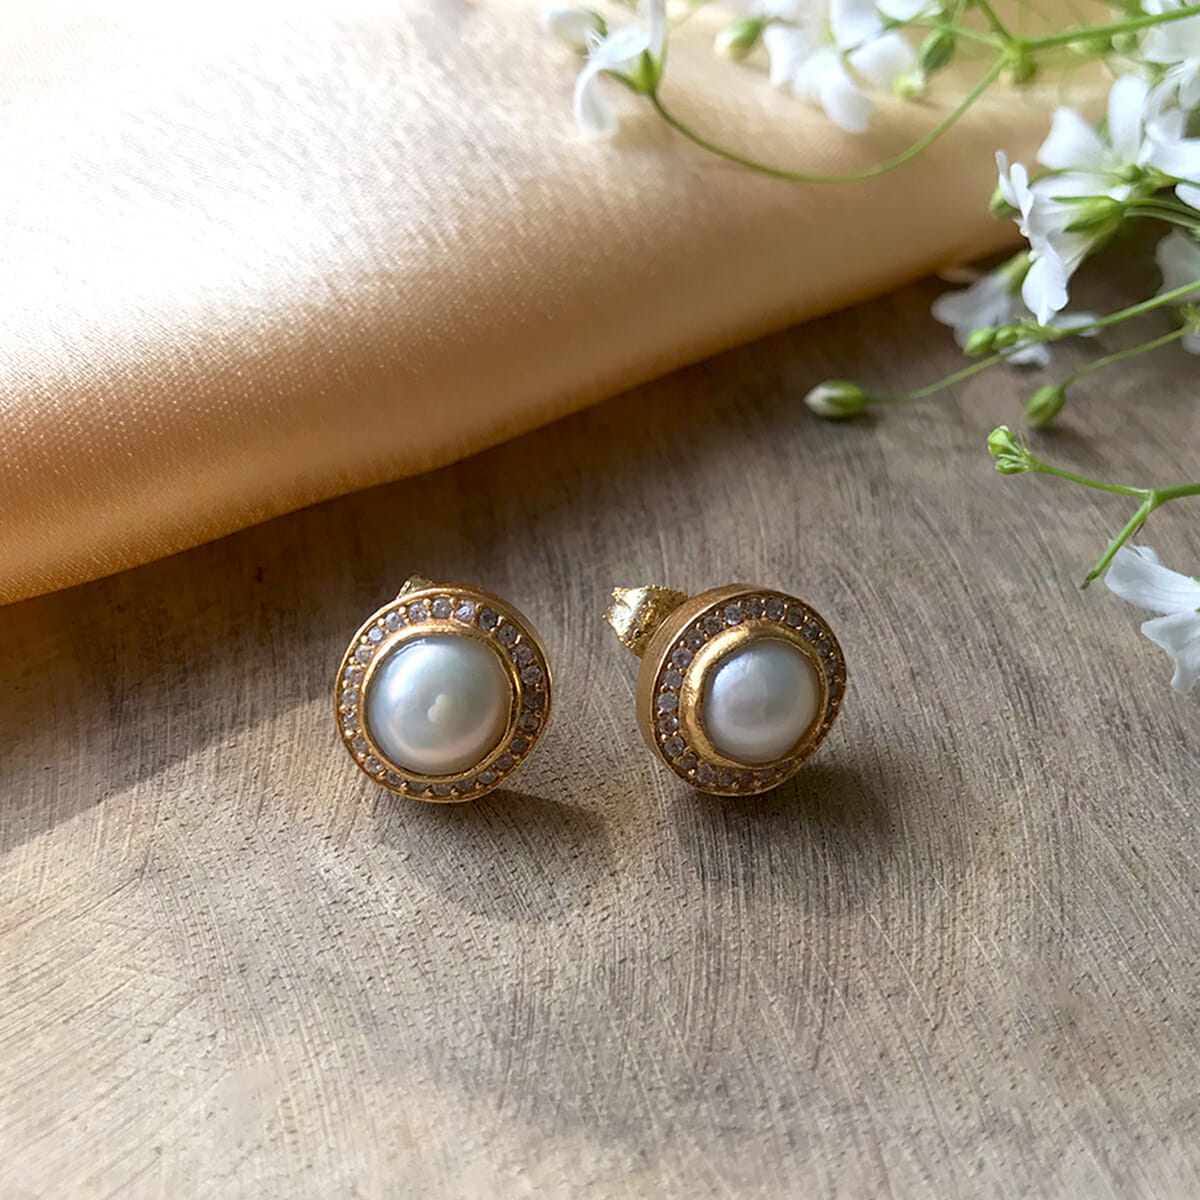 Pearl Stud Earrings14 Carat Gold Filled 10 mm Large Pearl E